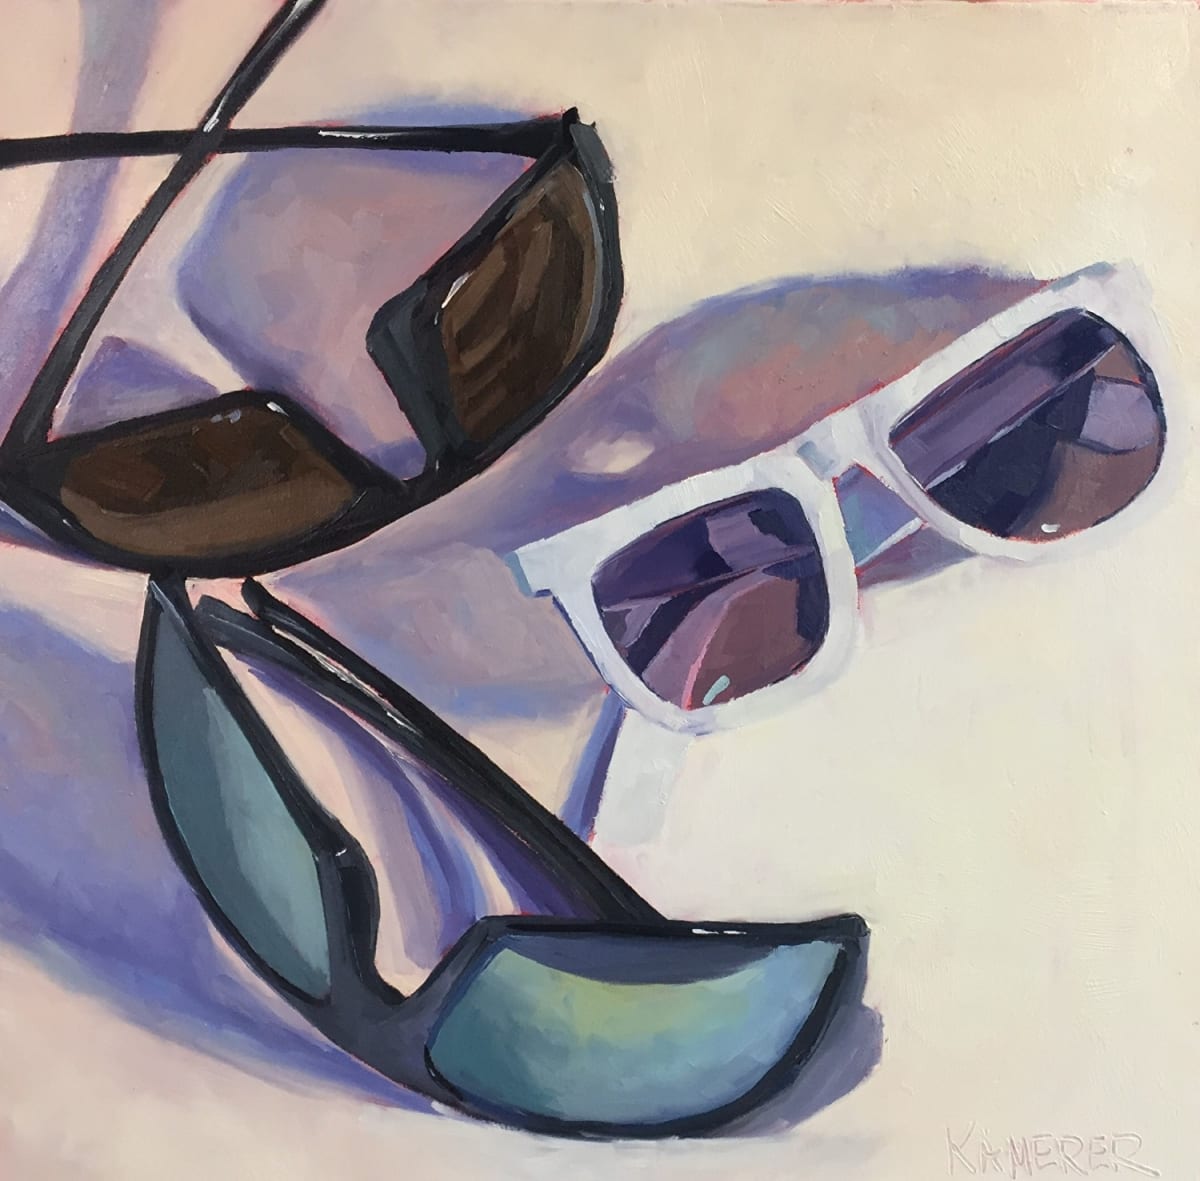 Too Cool by Mary Kamerer Impressionist Painting  Image: I love finding the shadows, reflections and refractions in objects—how fun to see them in these sunglasses!